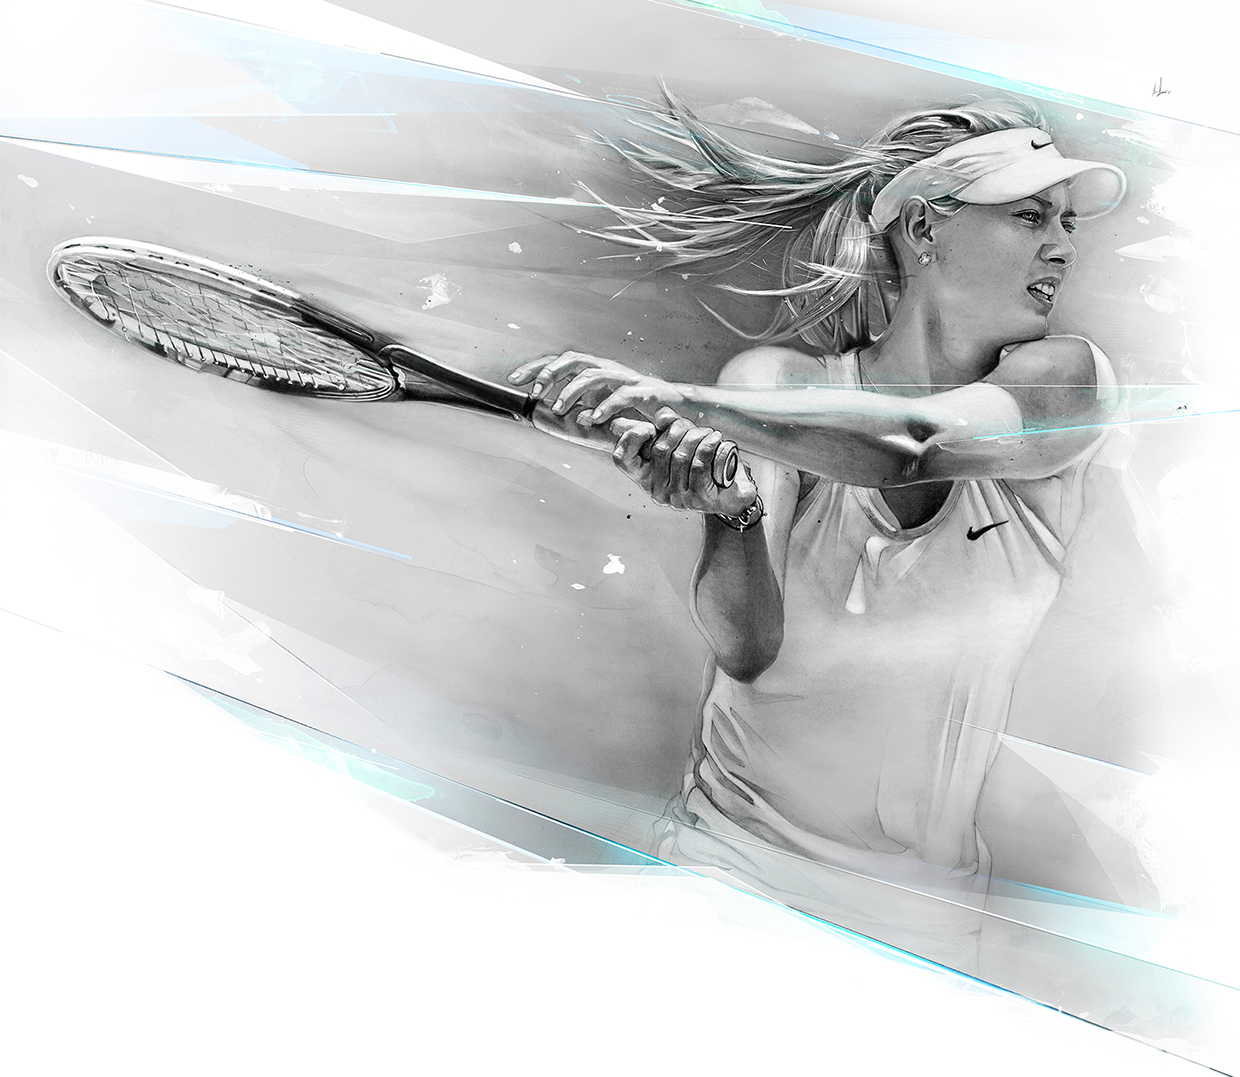 05-Maria-Sharapova-Alexis-Marcou-Traditional-and-Digital-Celebrity-Drawings-www-designstack-co